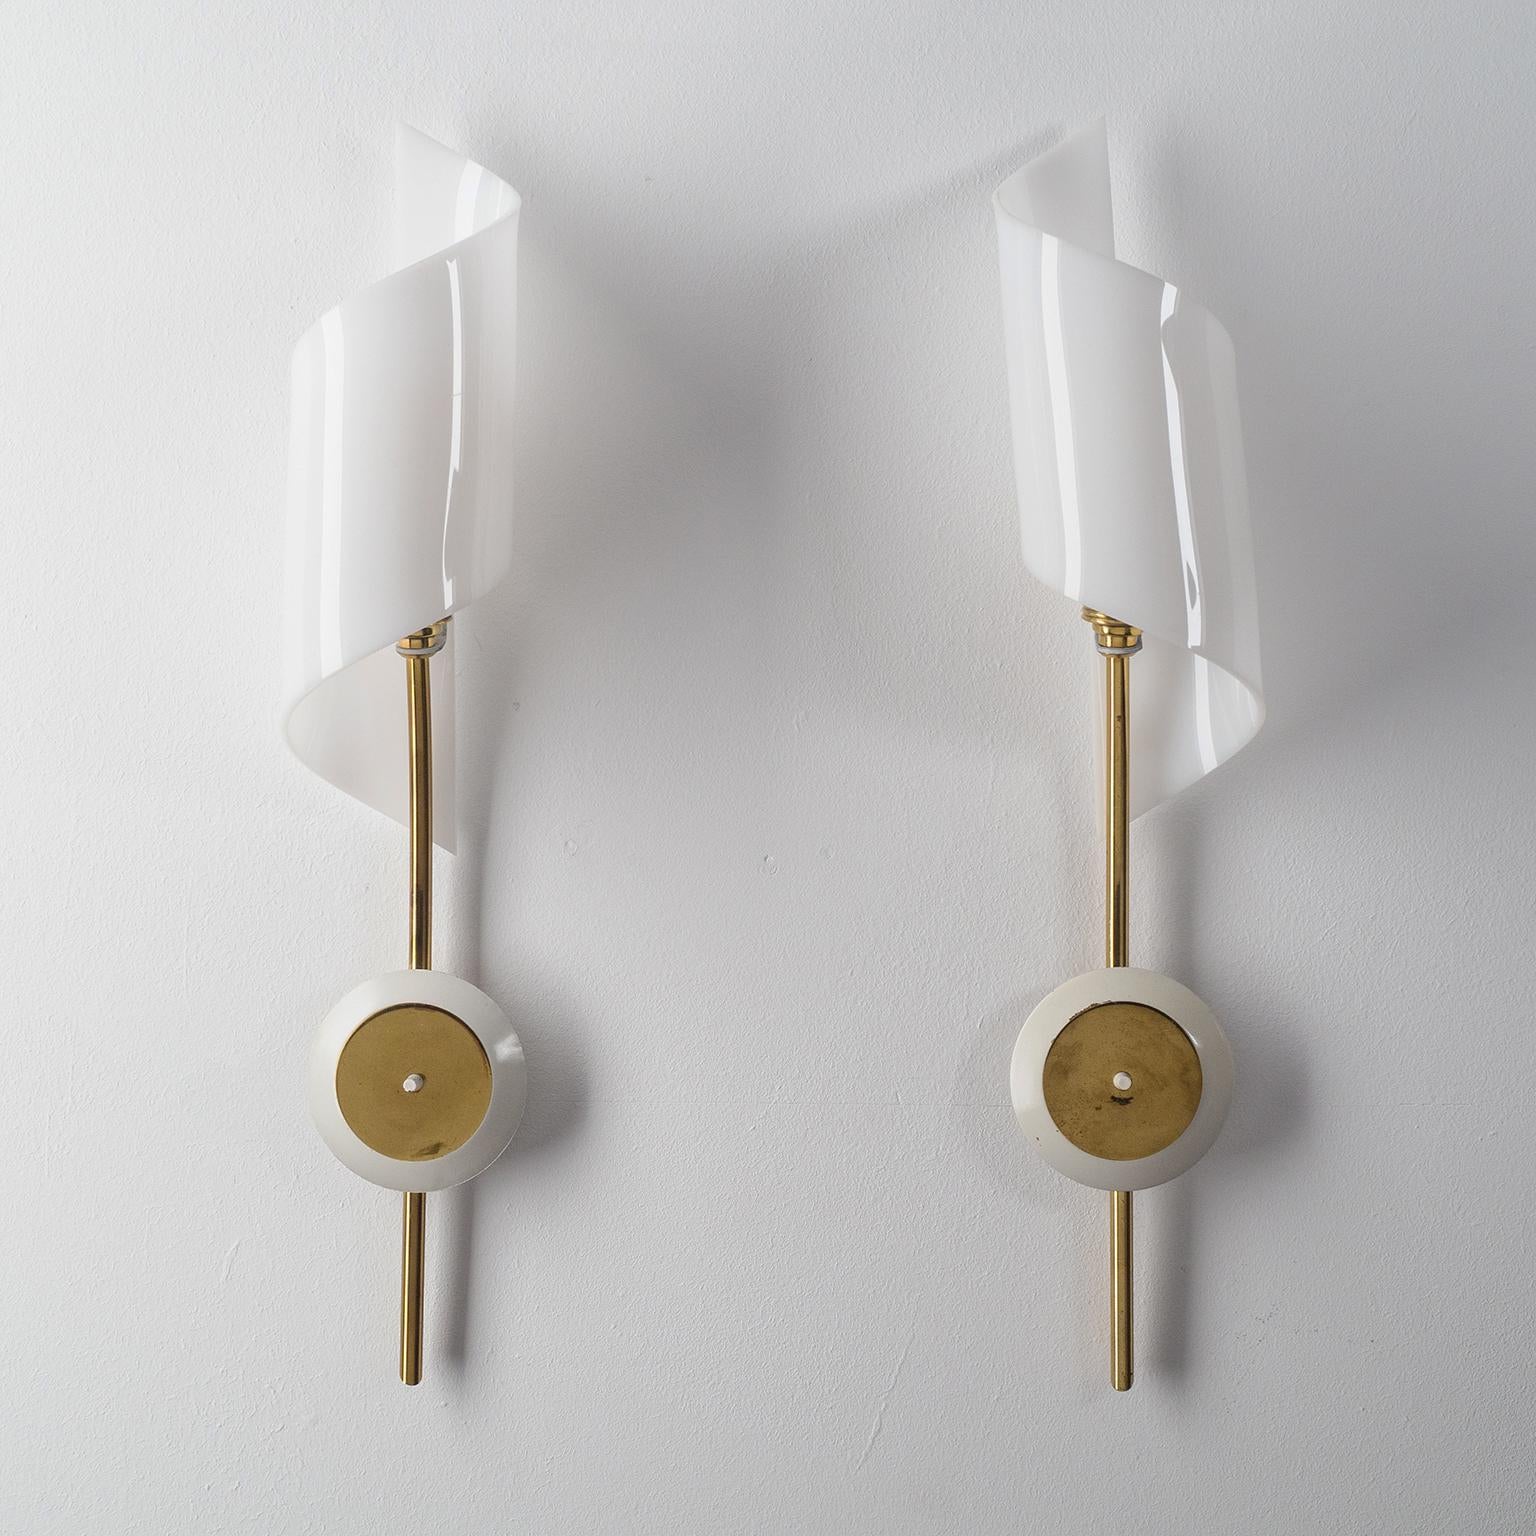 Very fine pair of French modernist sconces, circa 1960, attributed to Arlus. Slender all-brass hardware (partially lacquered) with 'twisted' acrylic shades. Very nice original condition with a light patina on the brass. One brass and ceramic E14